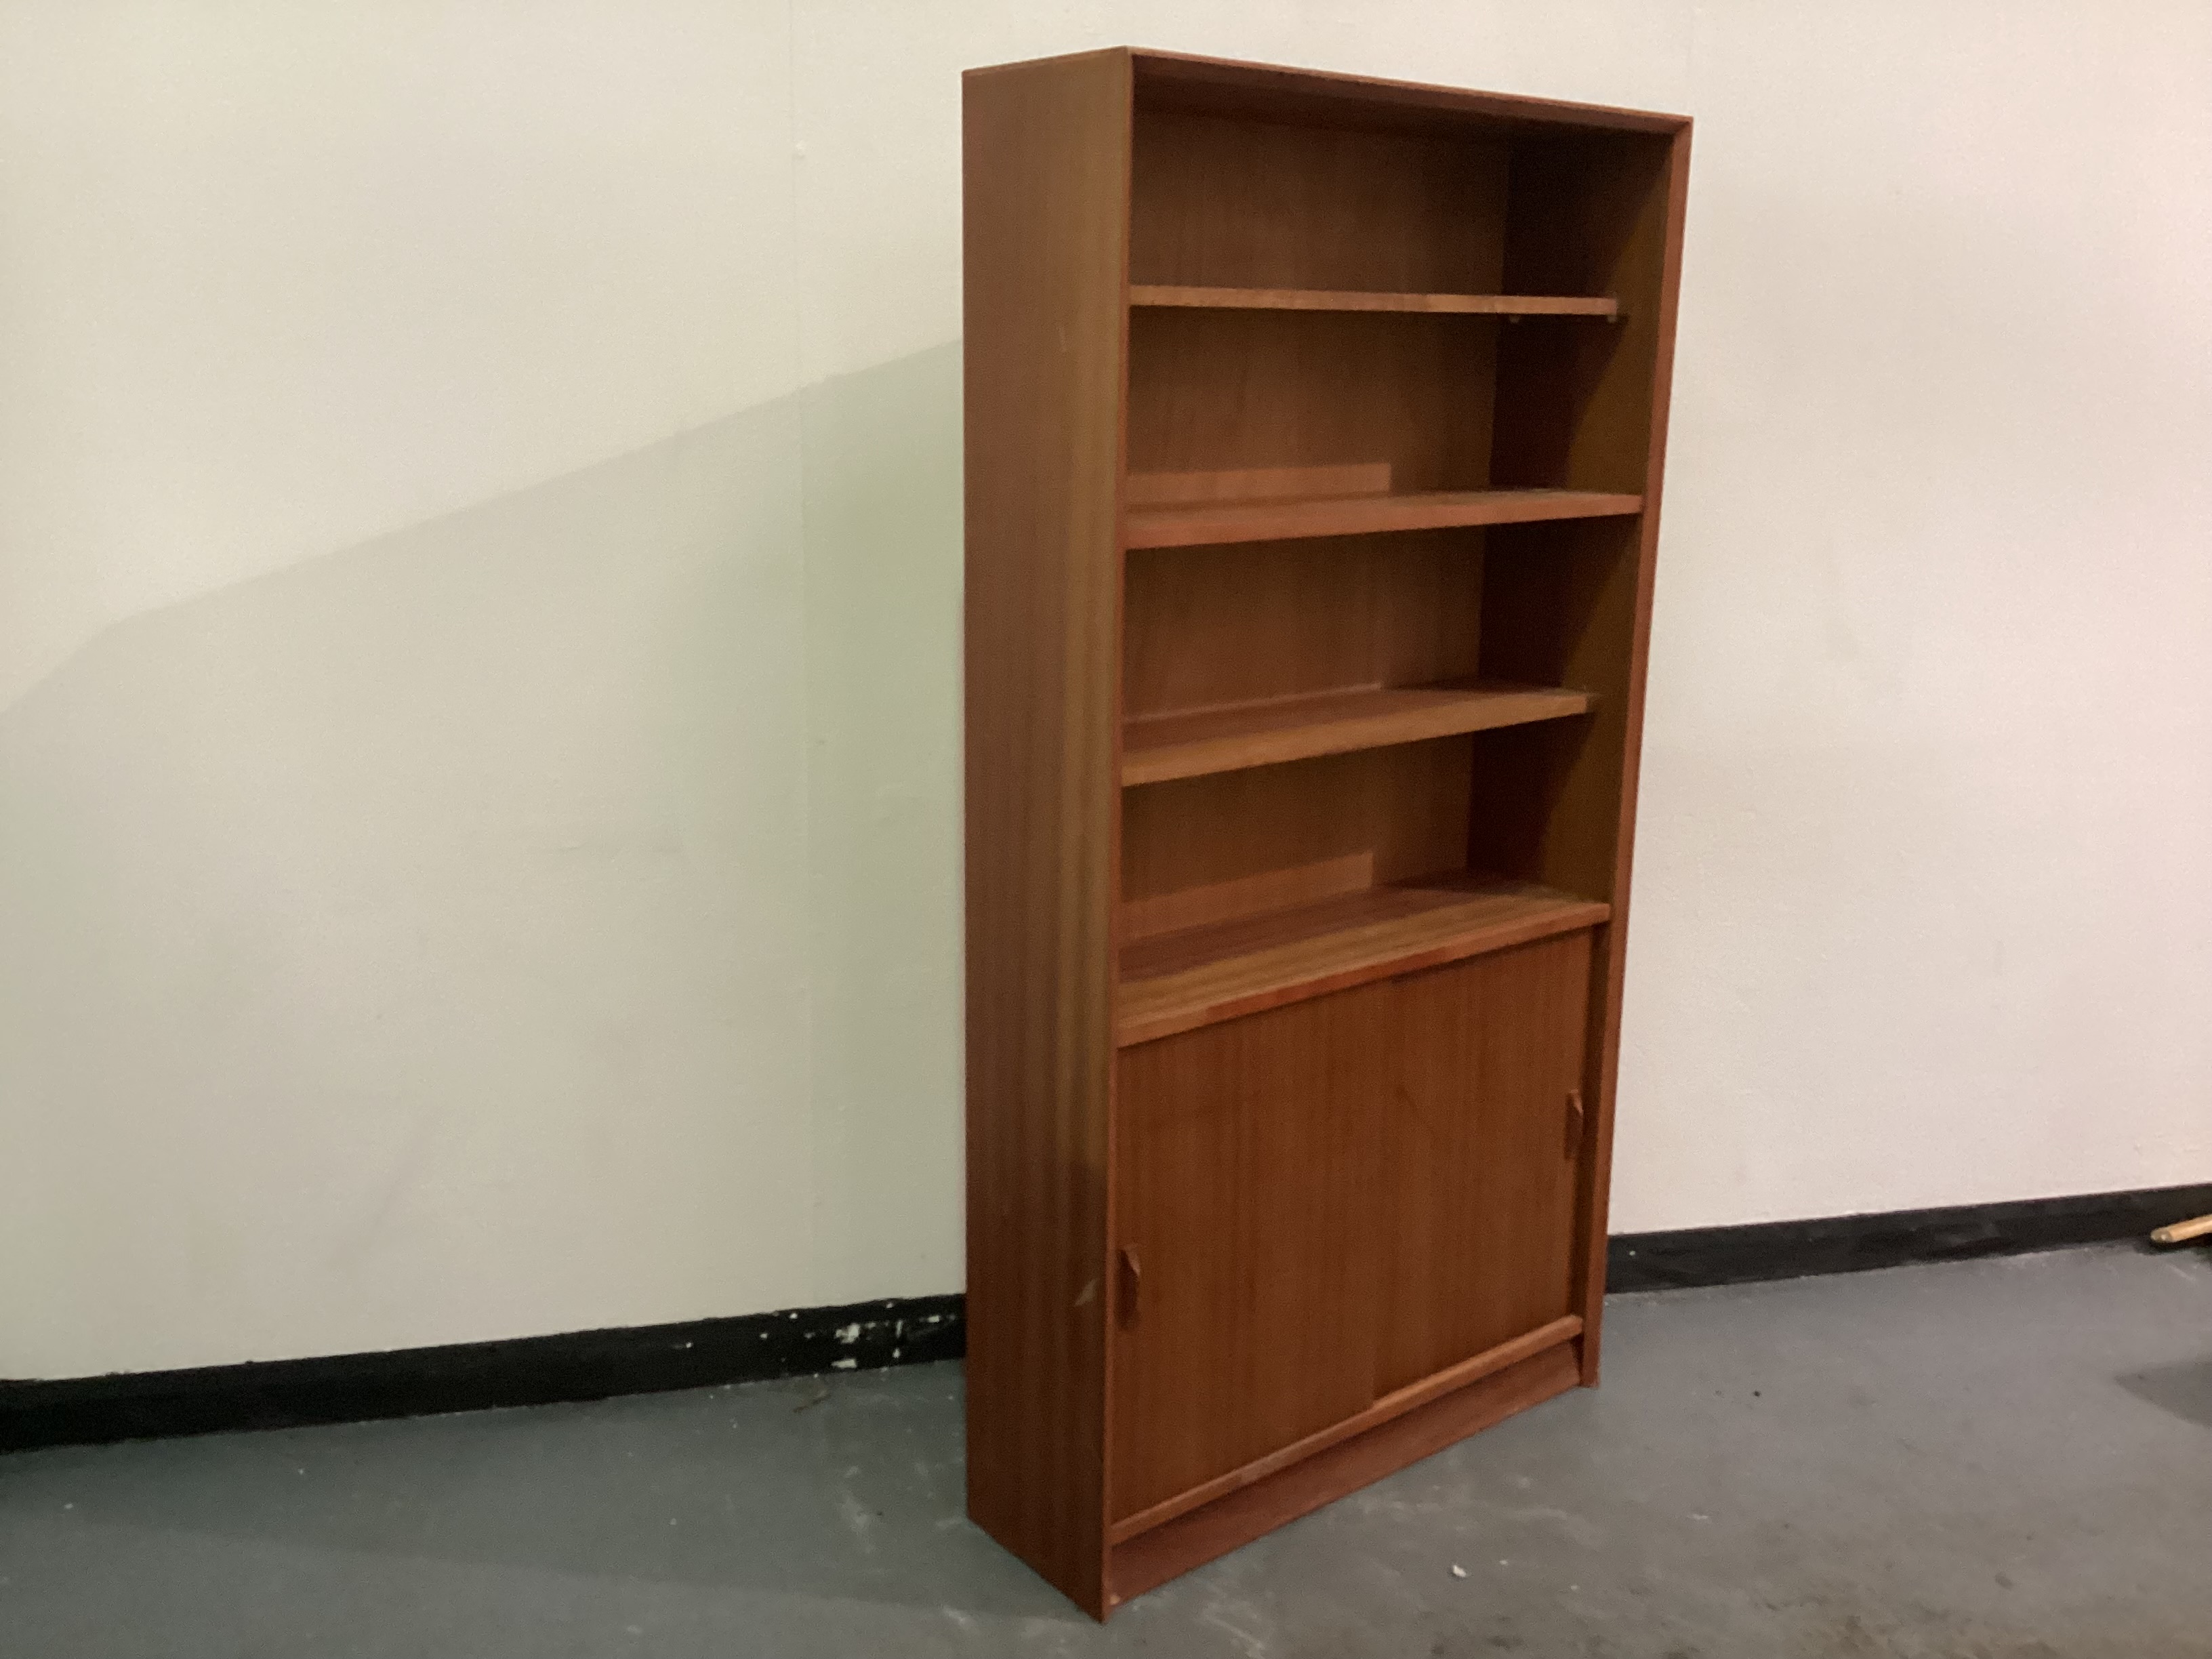 Display/Bookcase Unit with Doors